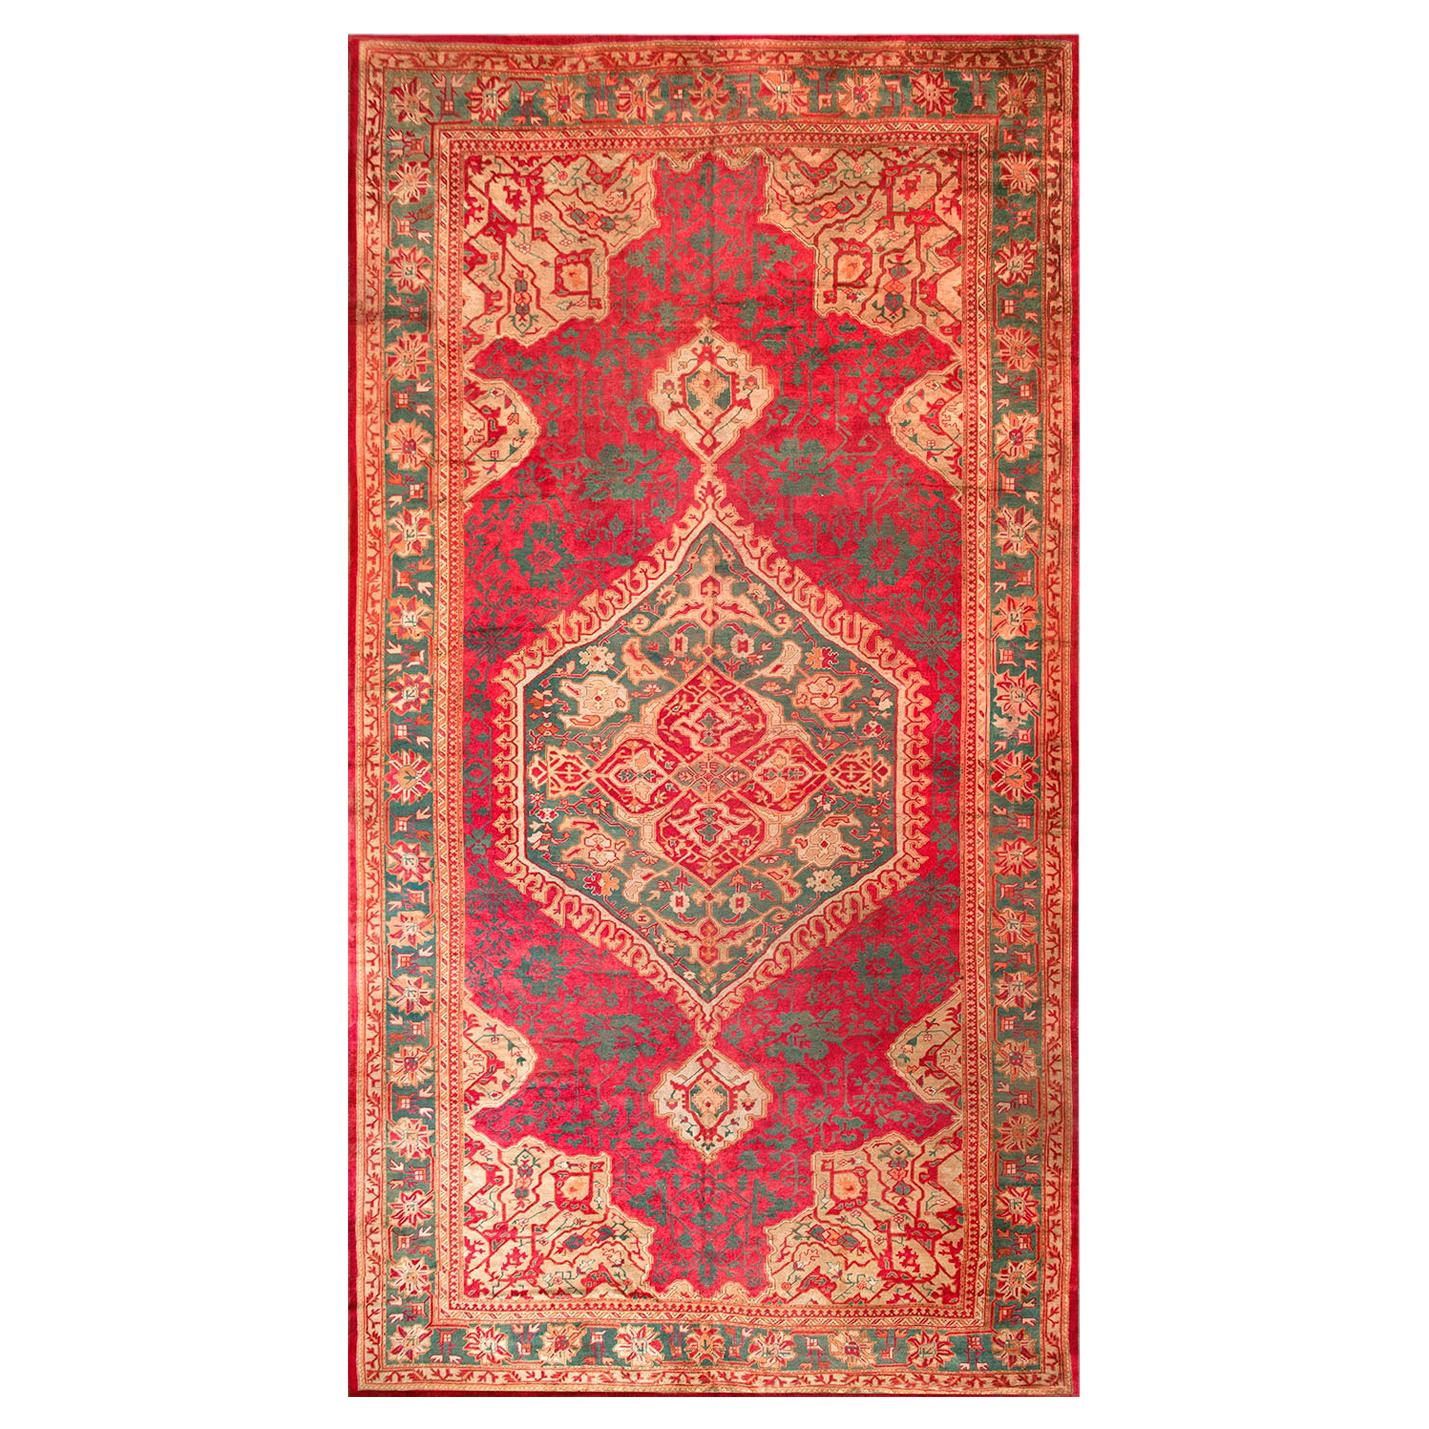 Early 20th Century Turkish Oushak Carpet ( 12' x 23' - 366 x 702 ) For Sale